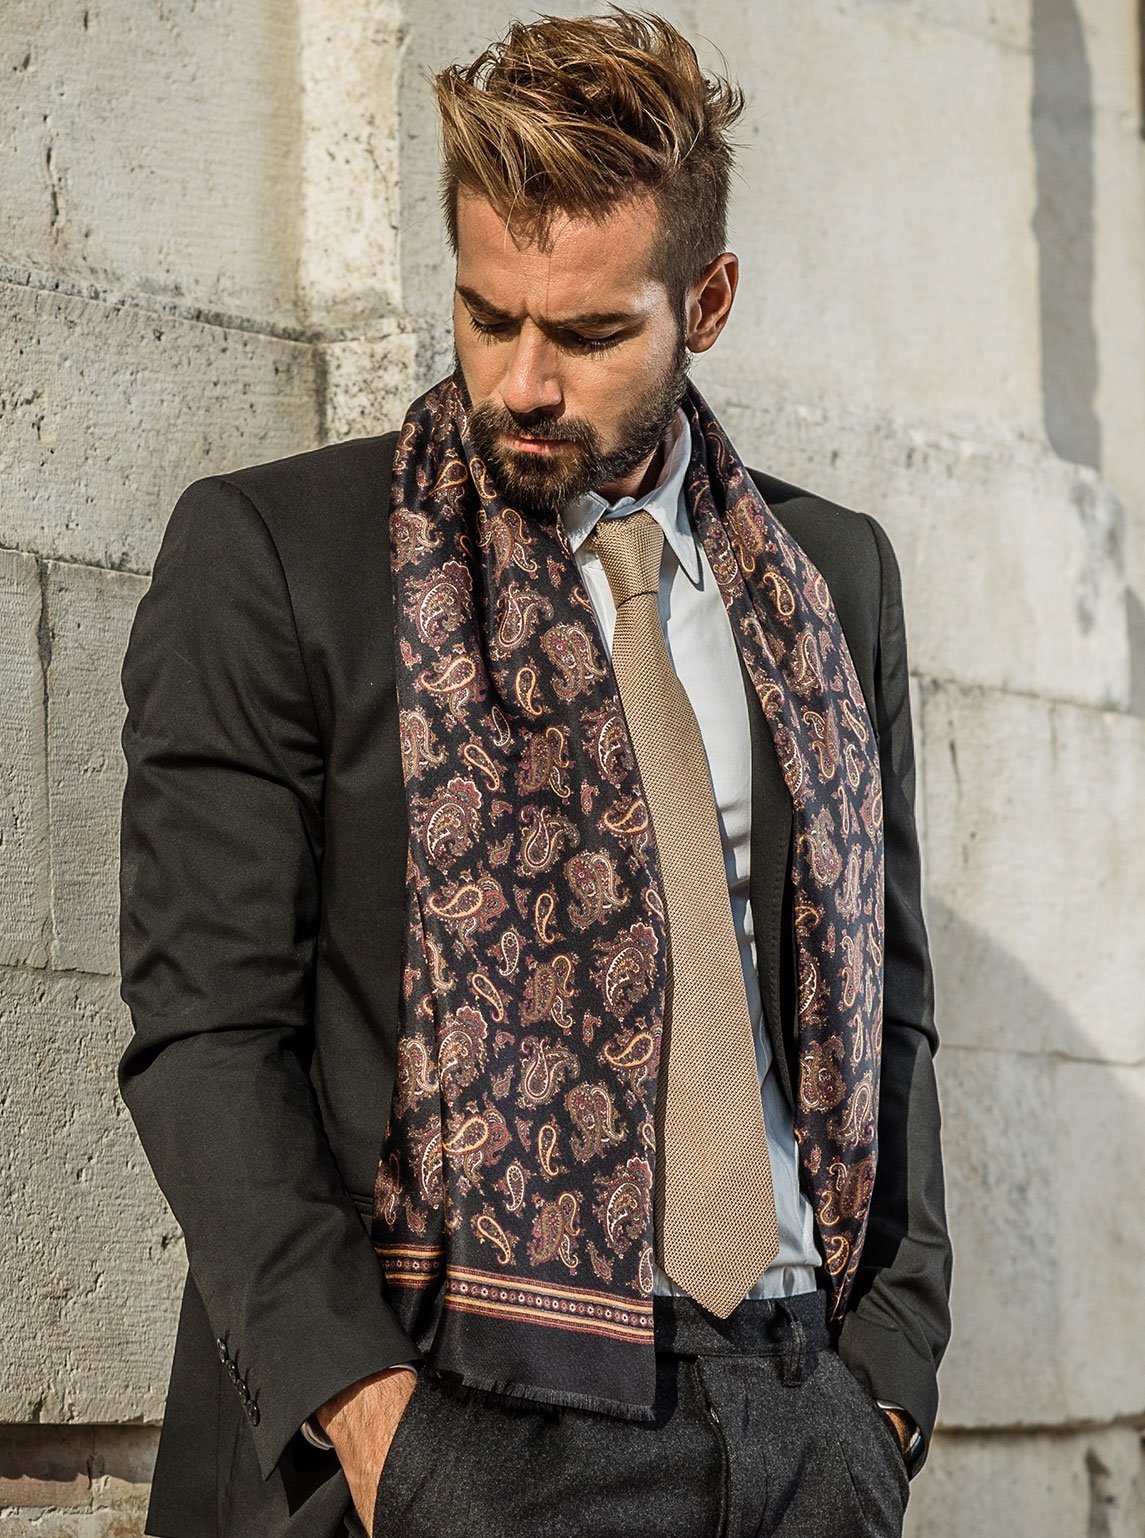 Man Scarf Wallpapers High Quality | Download Free